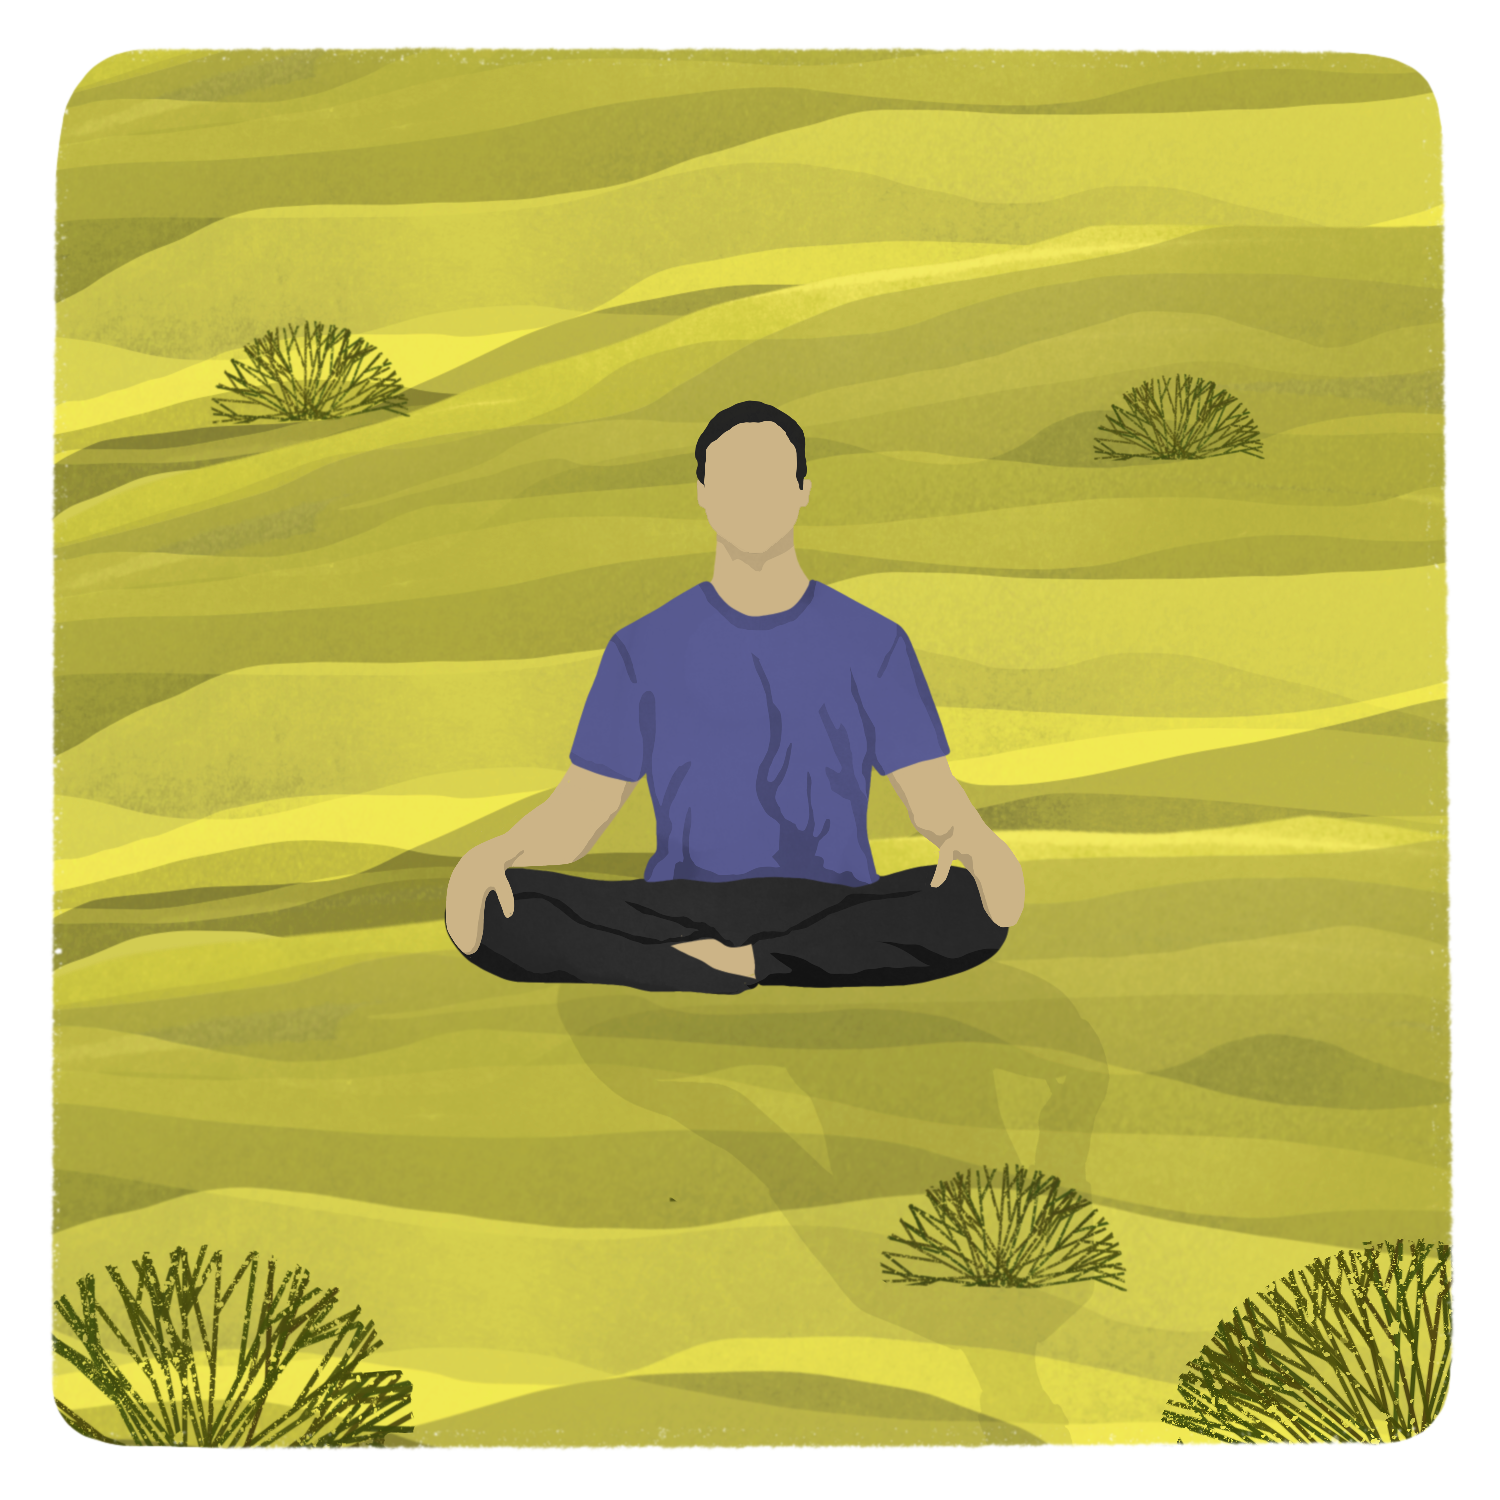 Nature therapy illustration of man meditating in nature